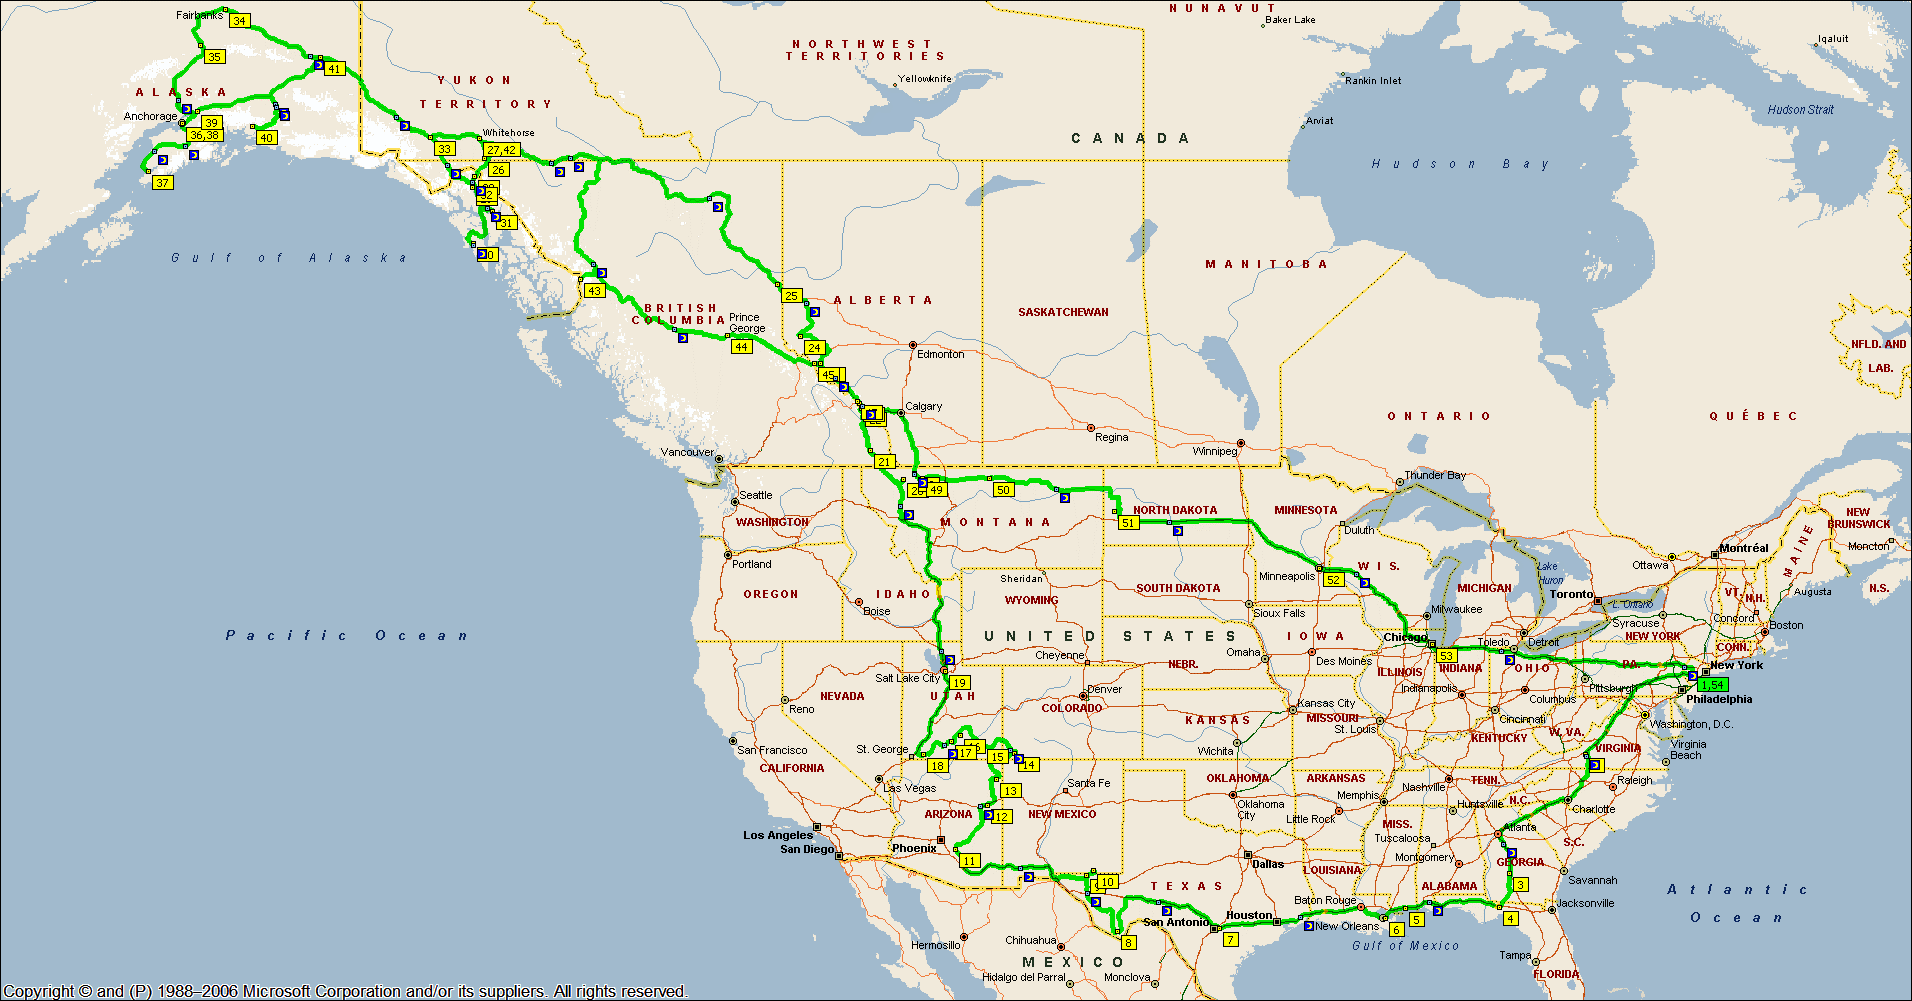 Our 2008 Travels